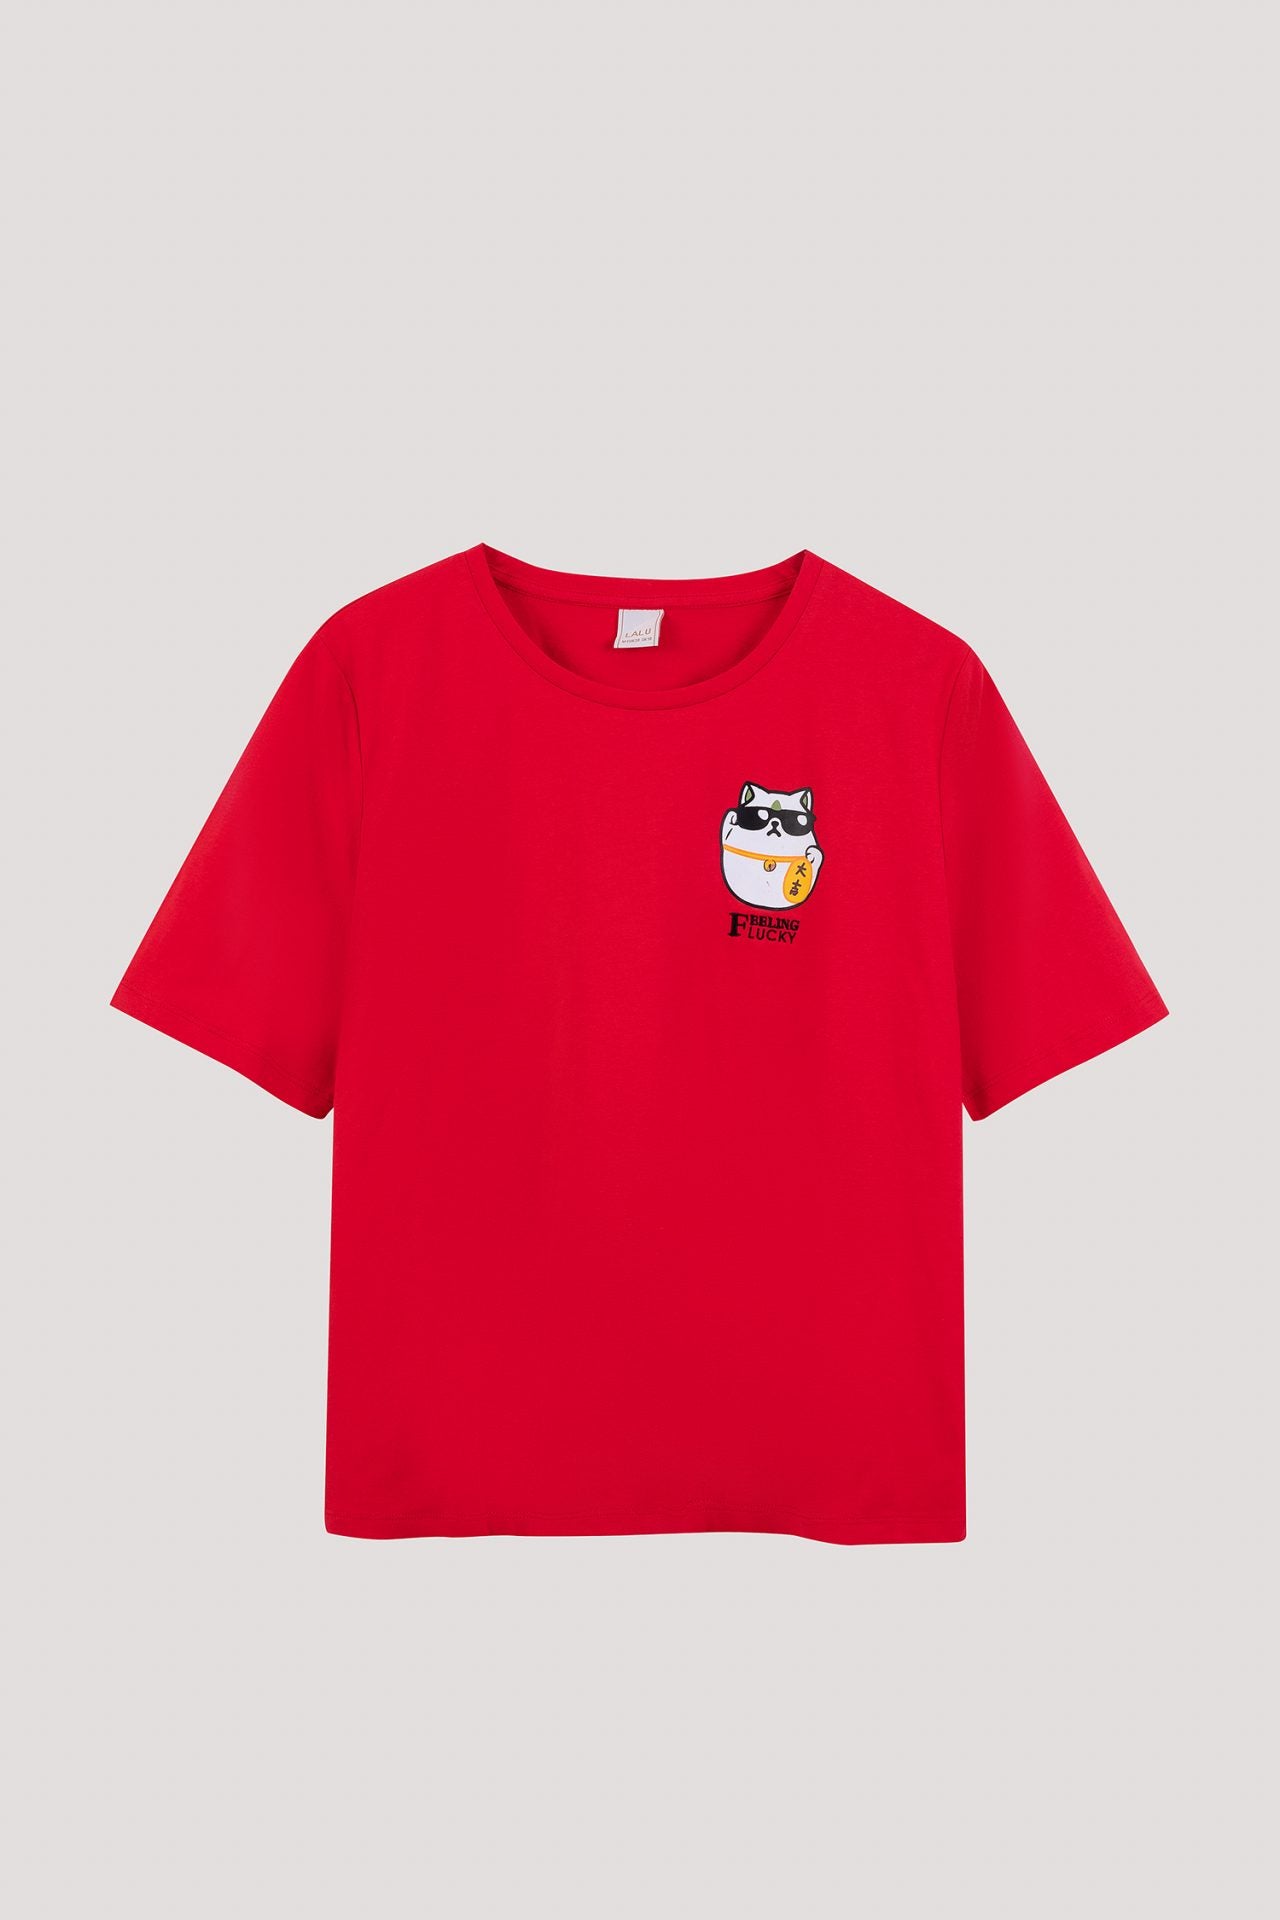 BT 10320 FORTUNE CAT TEE RED